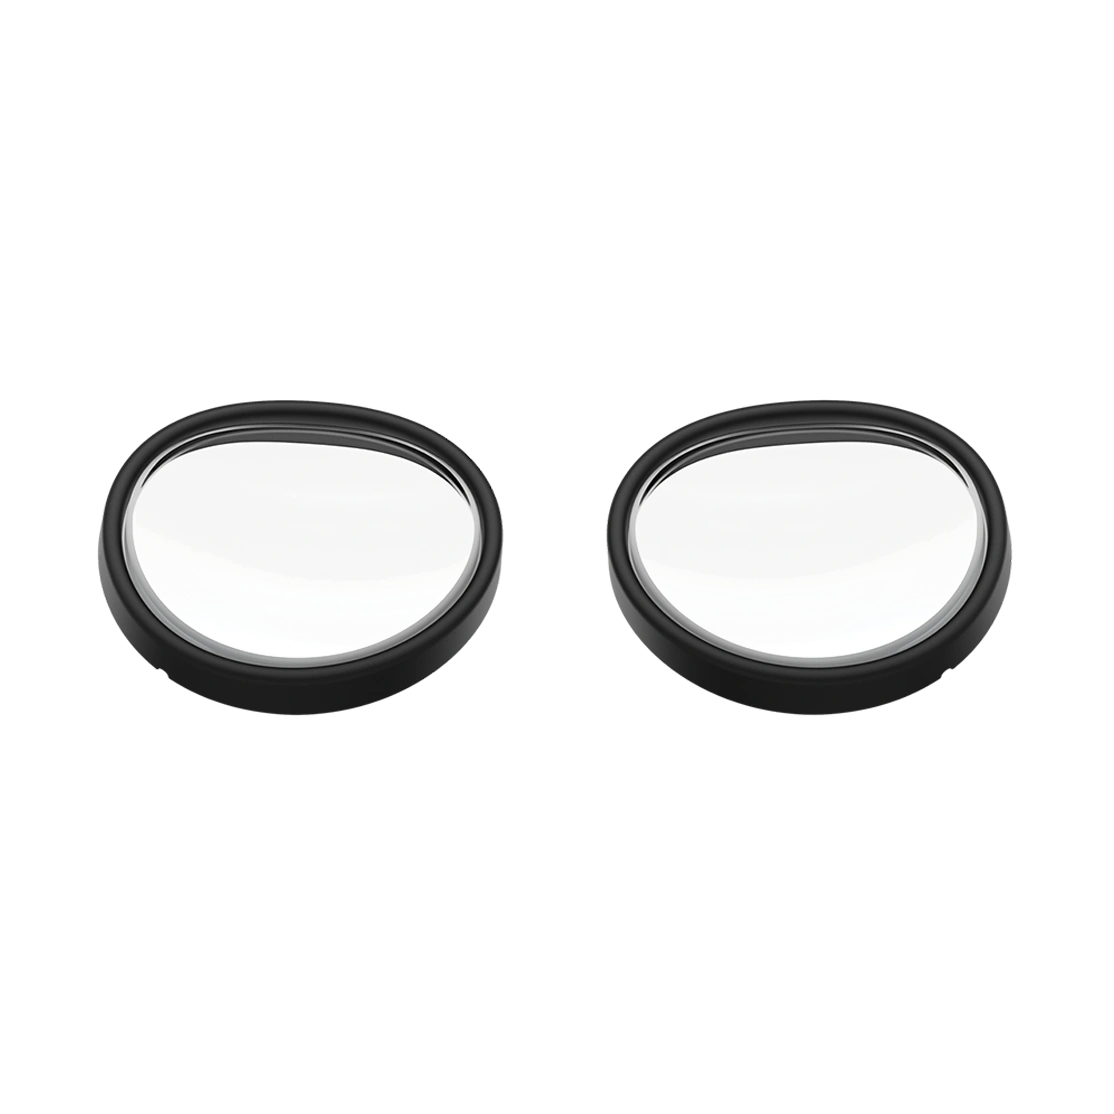 ZEISS Optical Inserts